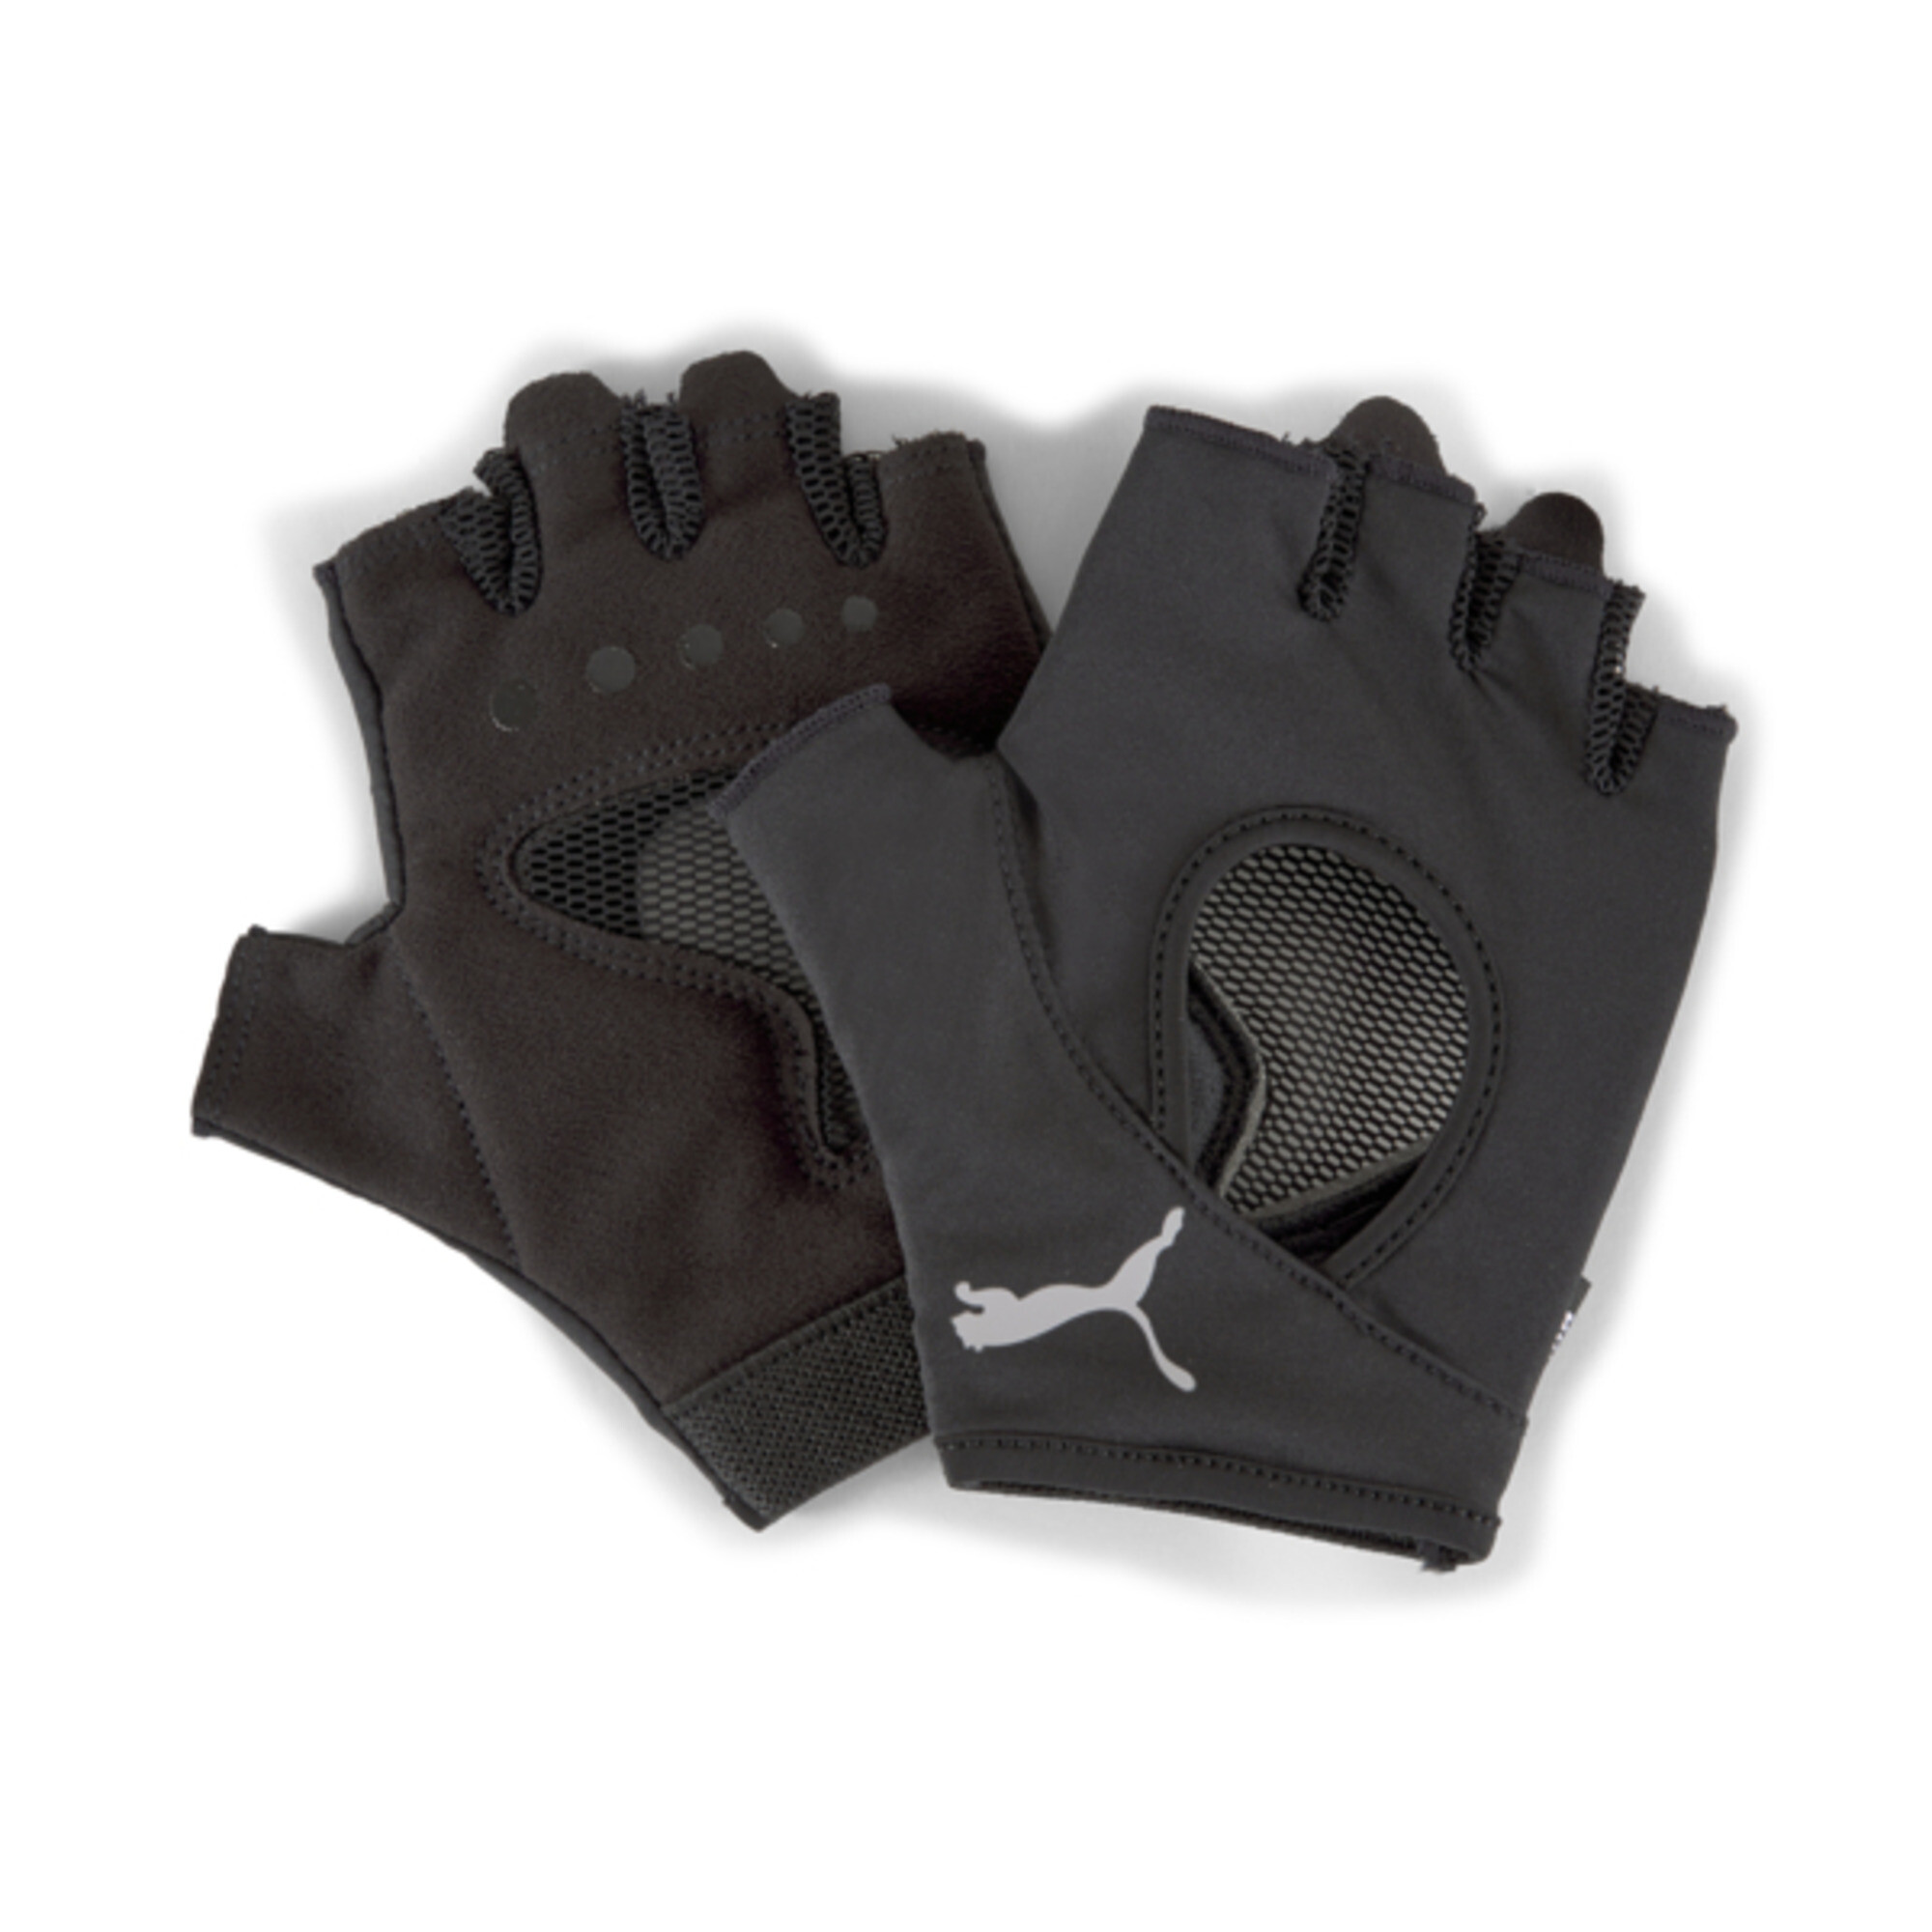 Women's PUMA Gym Training Gloves In 10 - Black, Size Small